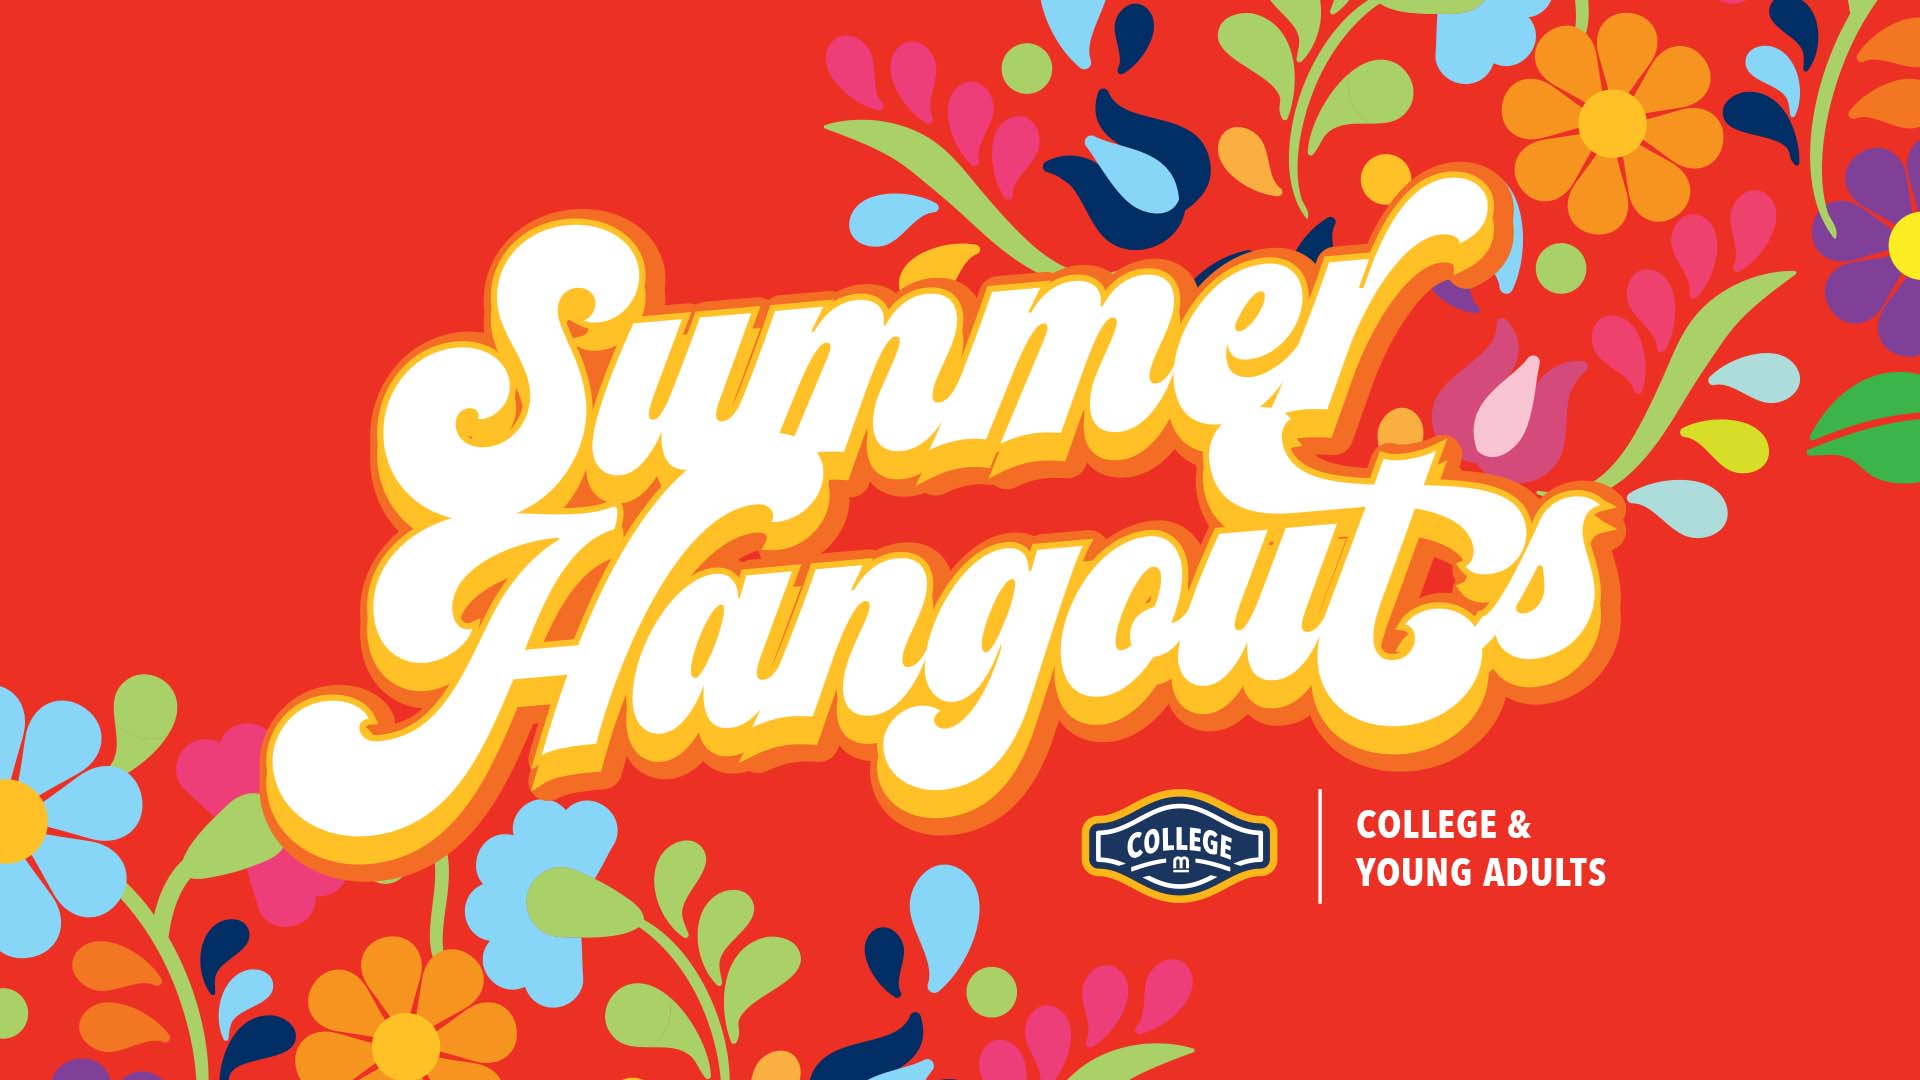 College Summer Hangouts at Mission City